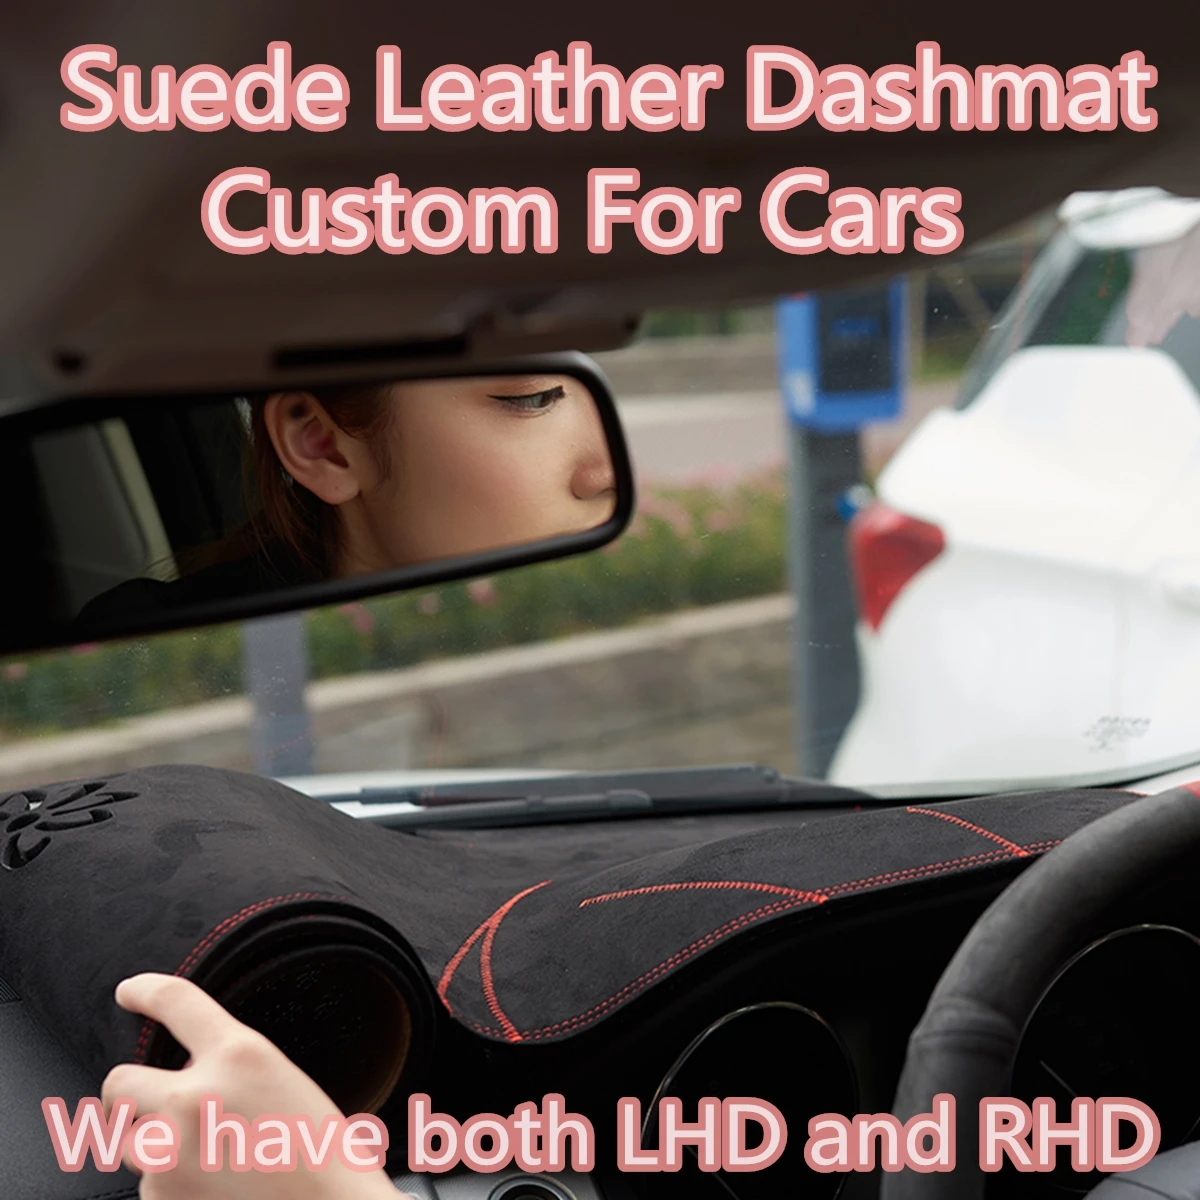 

Accessories Suede Leather Dashmat Dashboard Cover Pad Dash Mat Carpet Car-styling for Toyota Hiace G5 H200 2005 2006 2009 - 2018